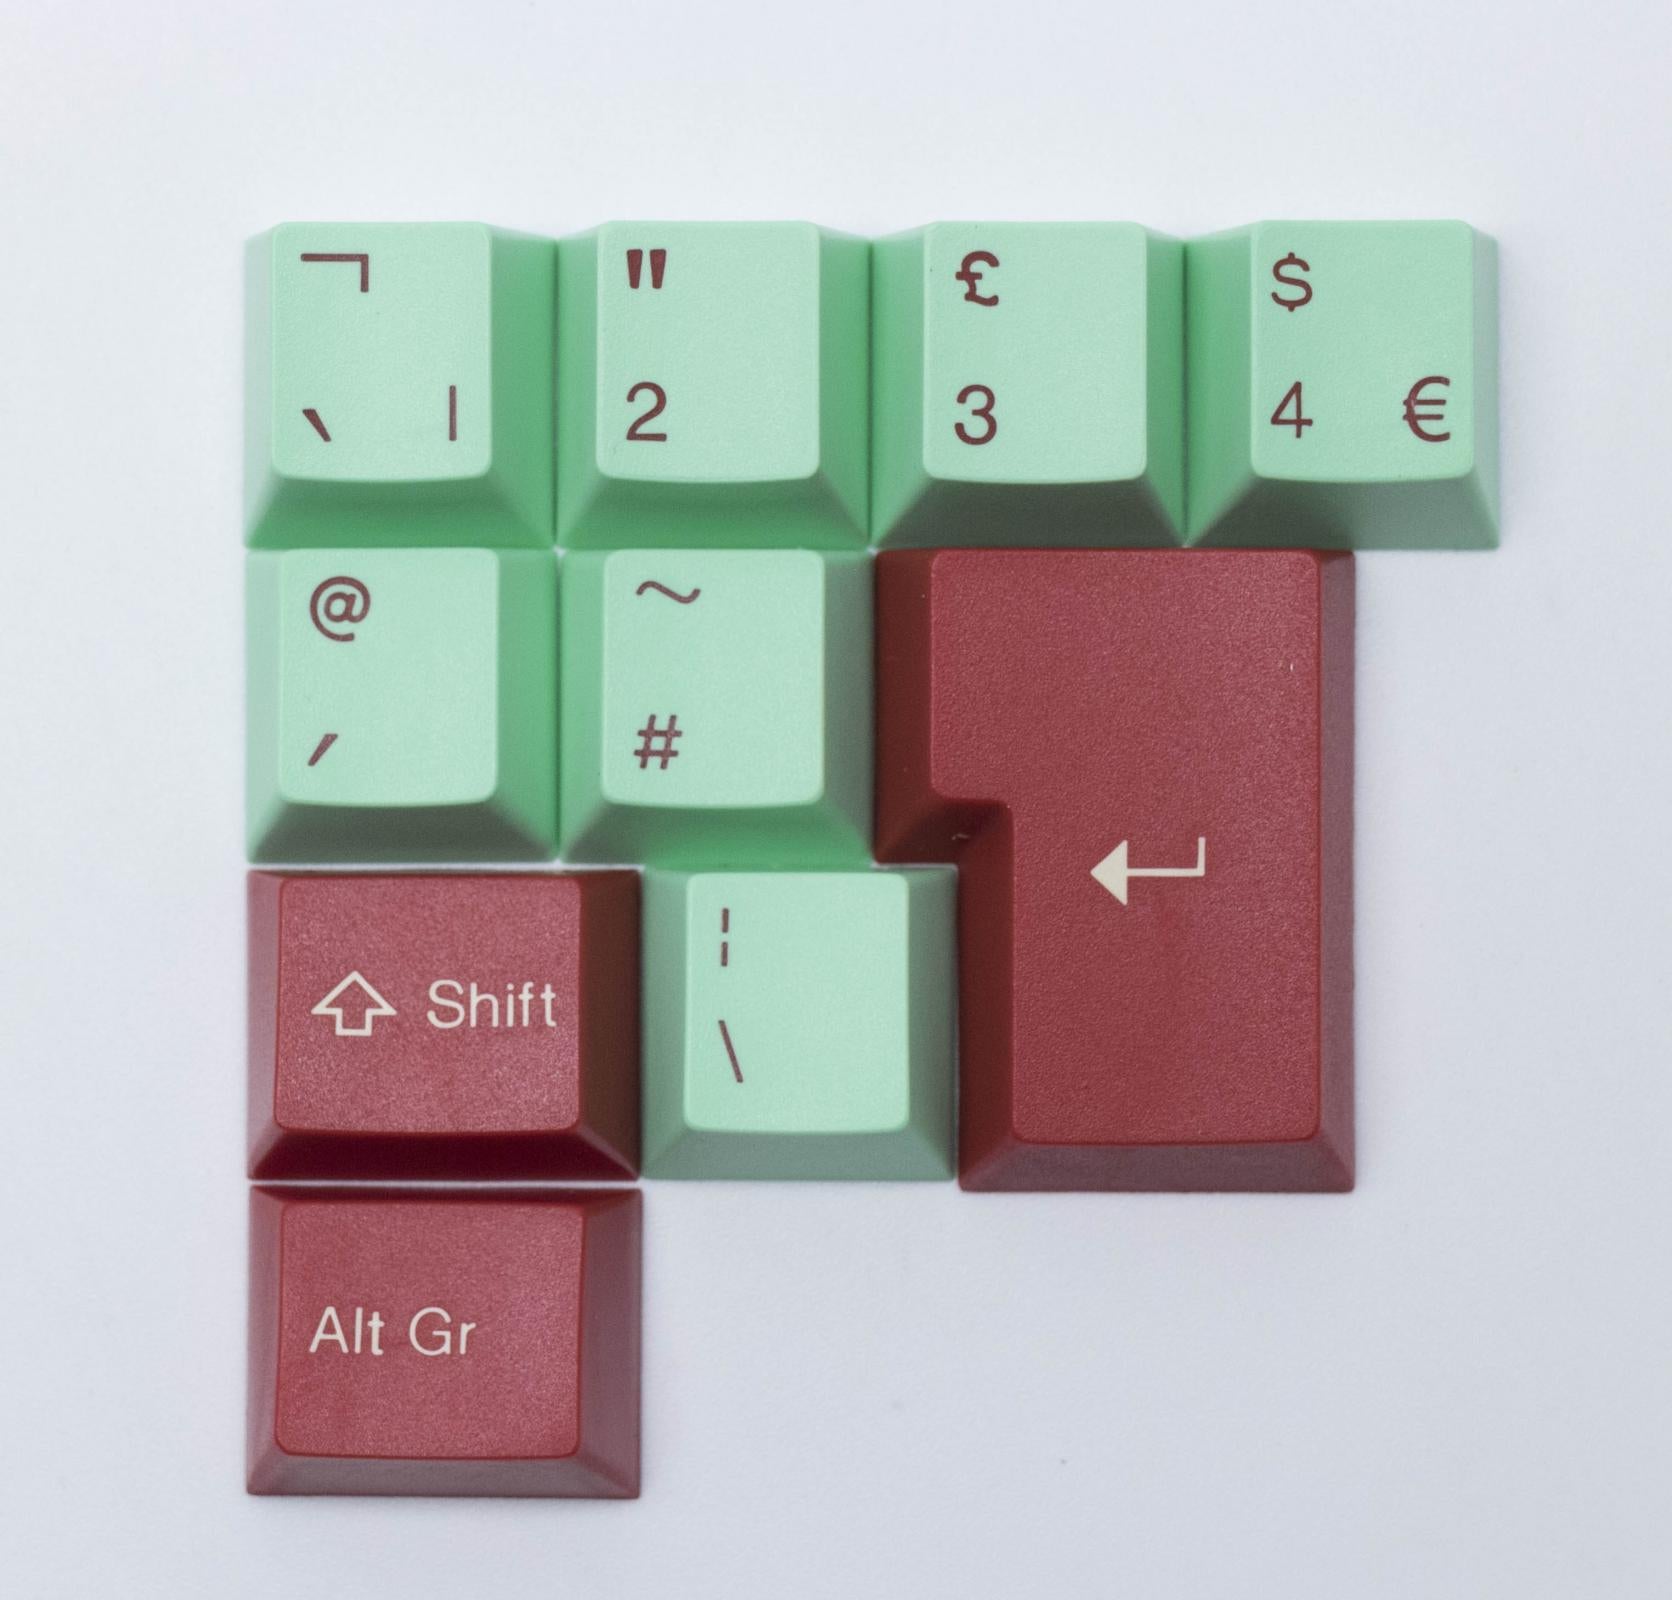 Tai-Hao 111 Key Cubic ABS Double Shot Keycap Set Jukebox (Mint/Red) MKDCTYL25O |37630|